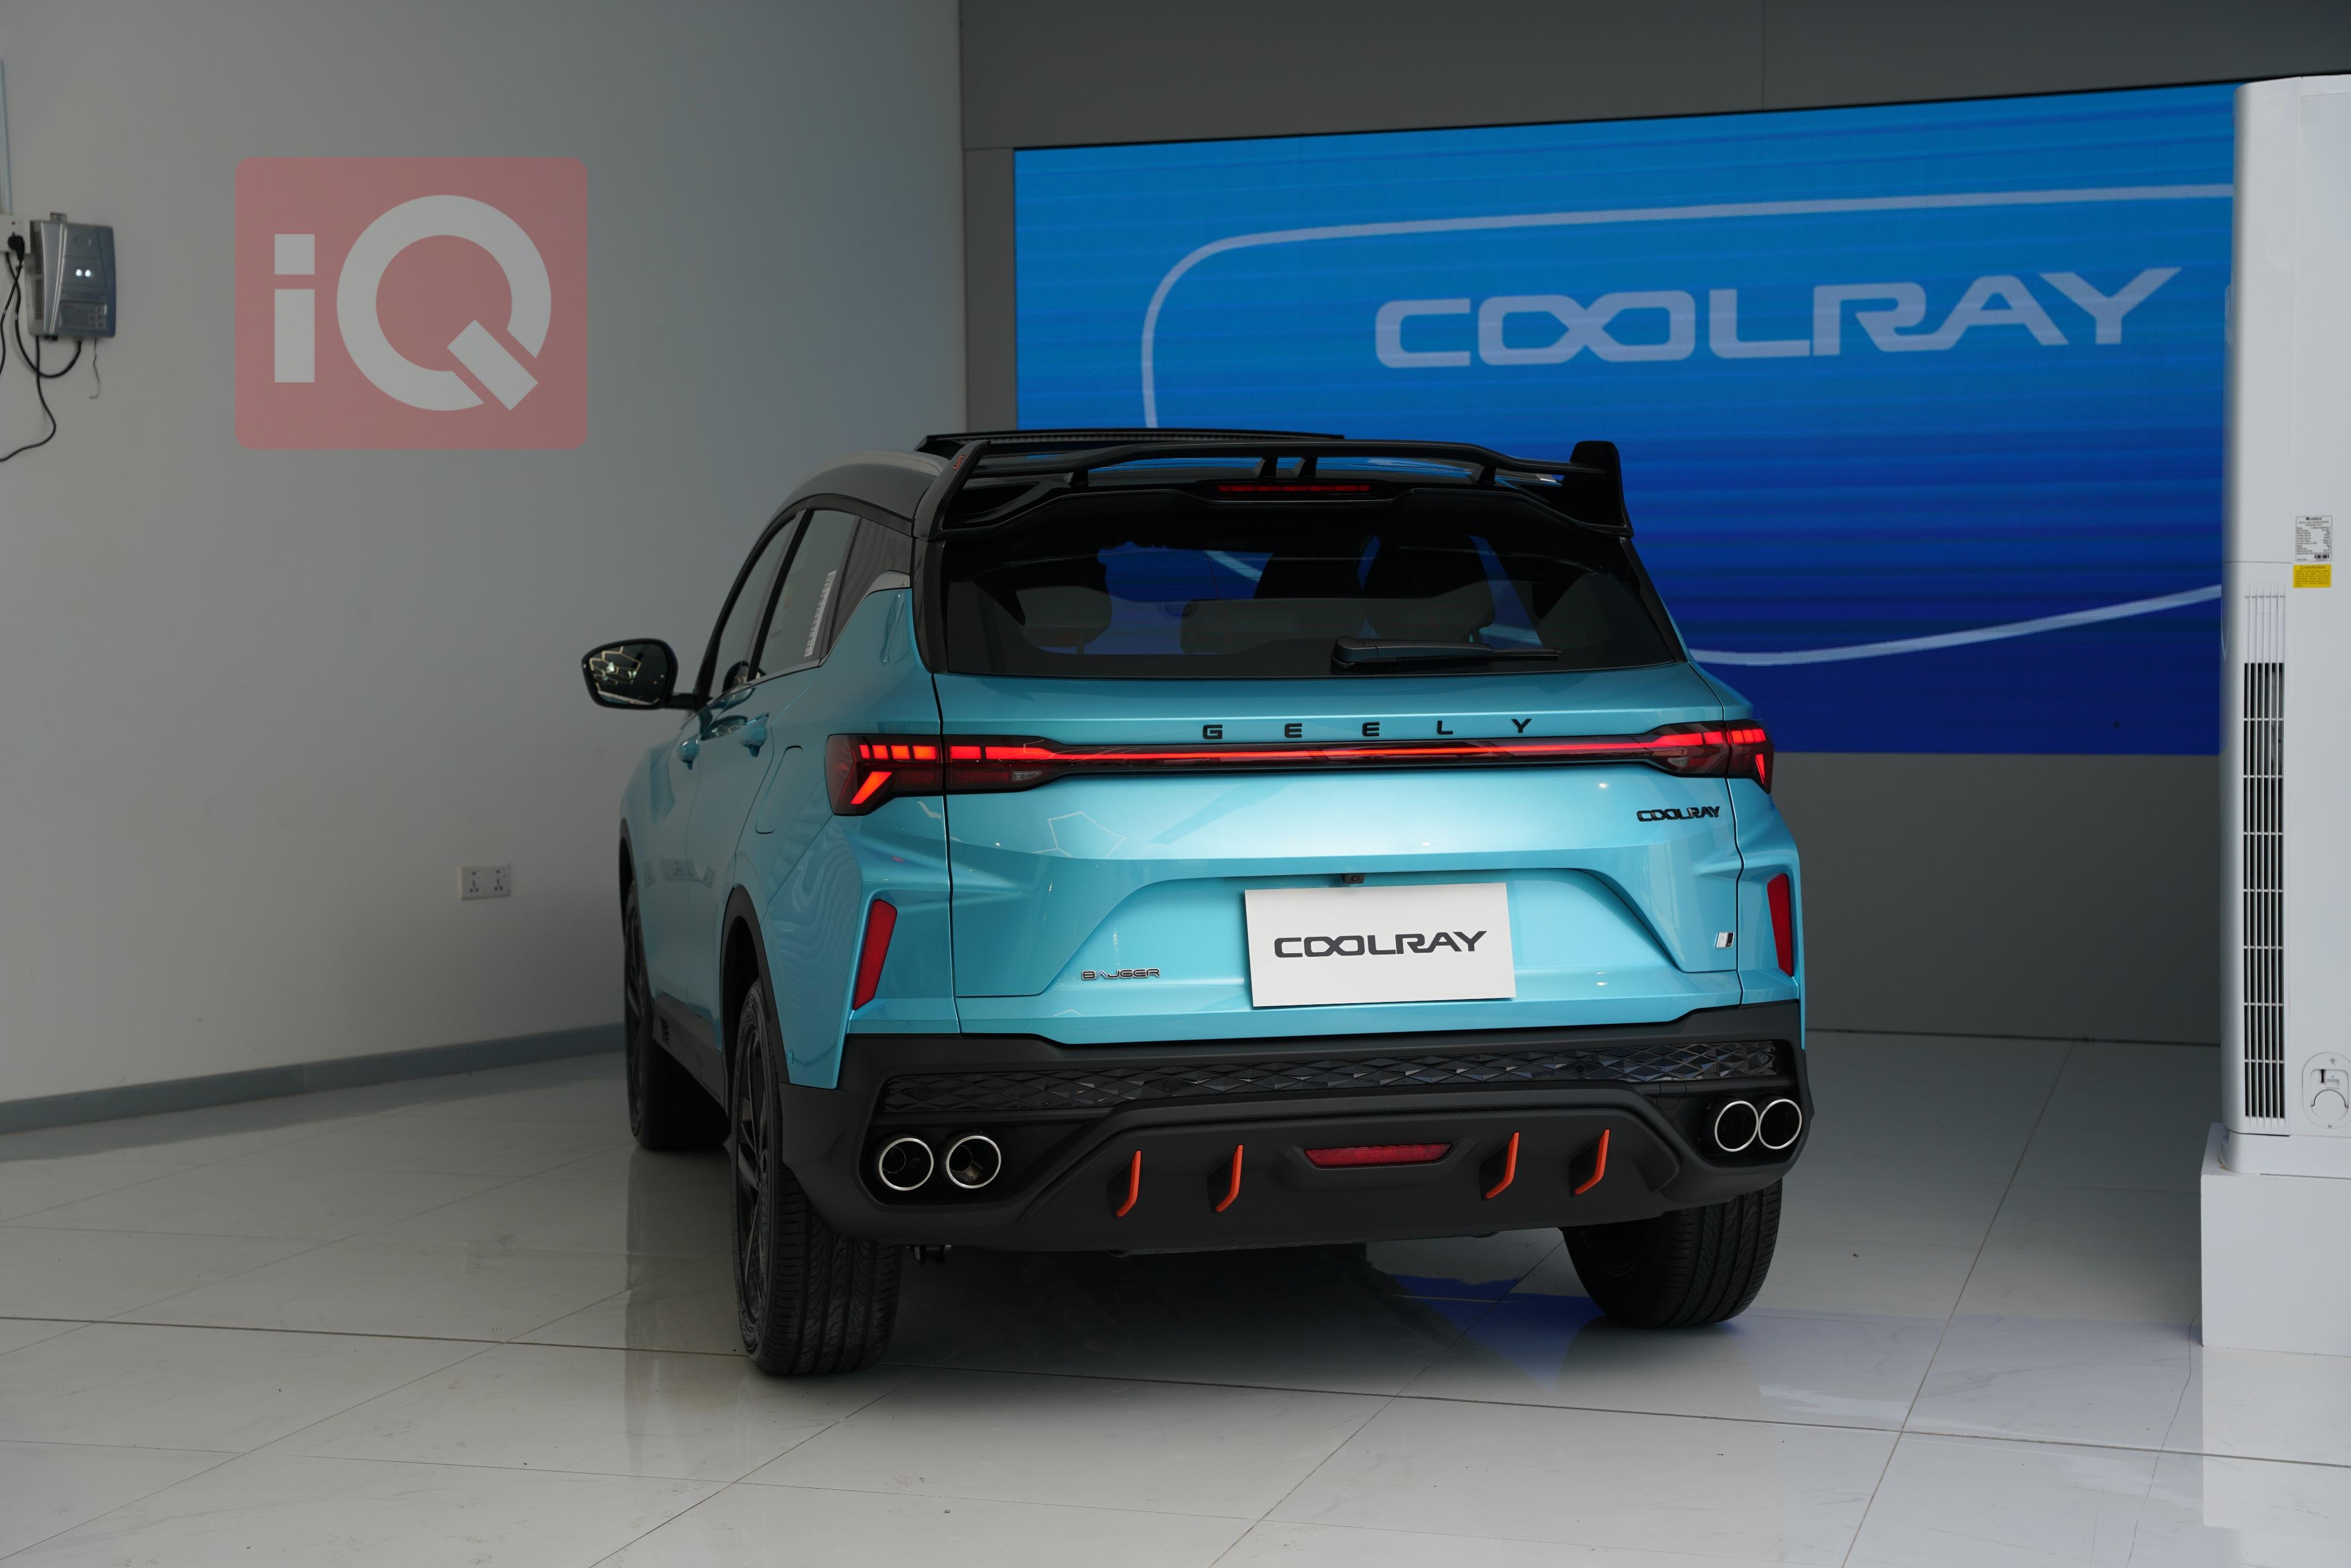 Geely Coolray